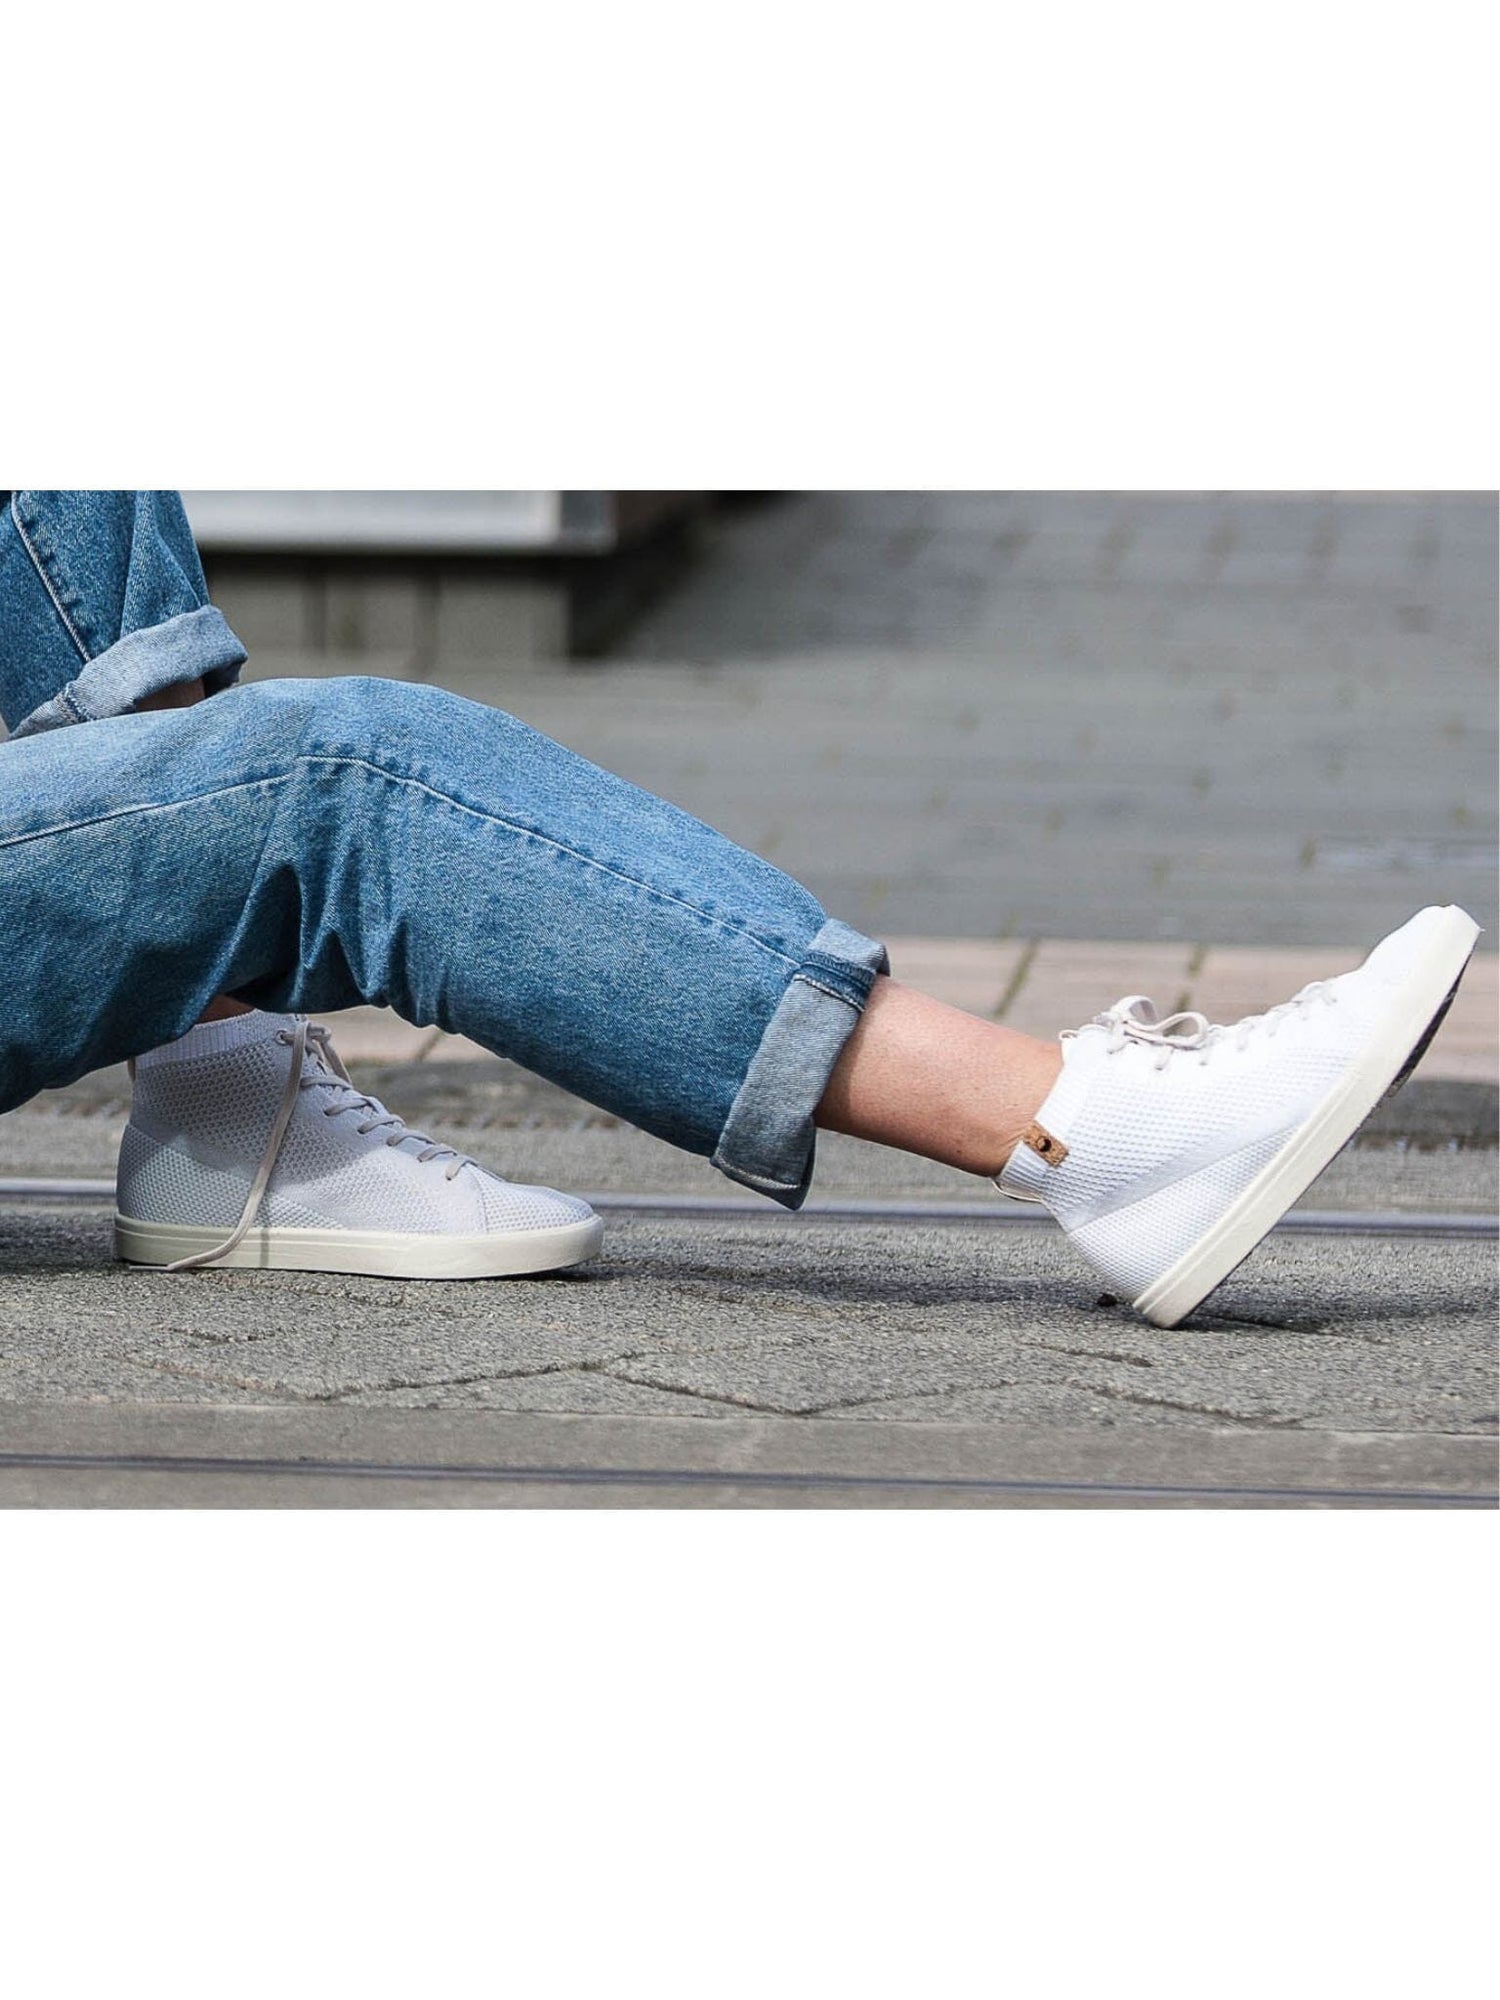 Saola W's Wanaka Knit Sneakers - Recycled PET and Bio-sourced materials White Shoes